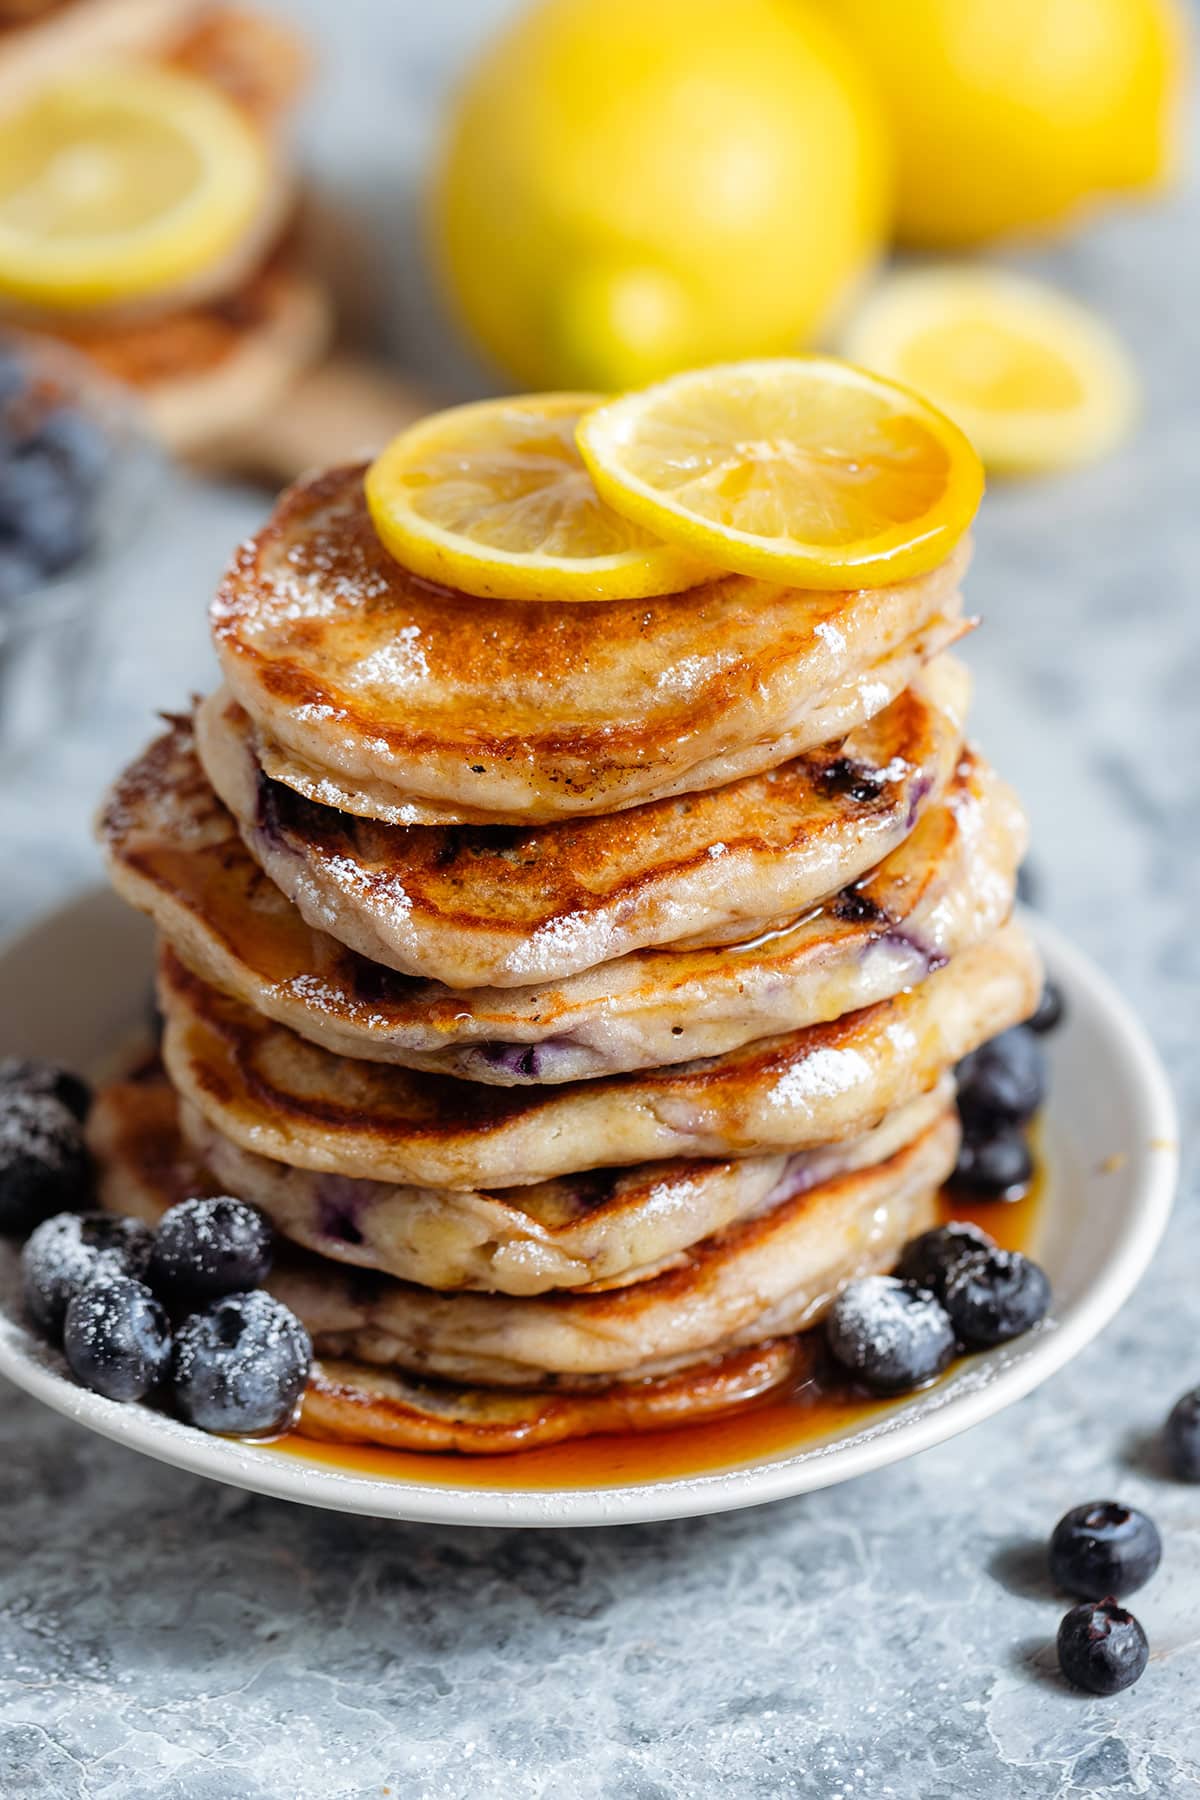 A stack of blueberry pancakes garnished with lemon slices and more blueberries, and drizzled with maple syrup.